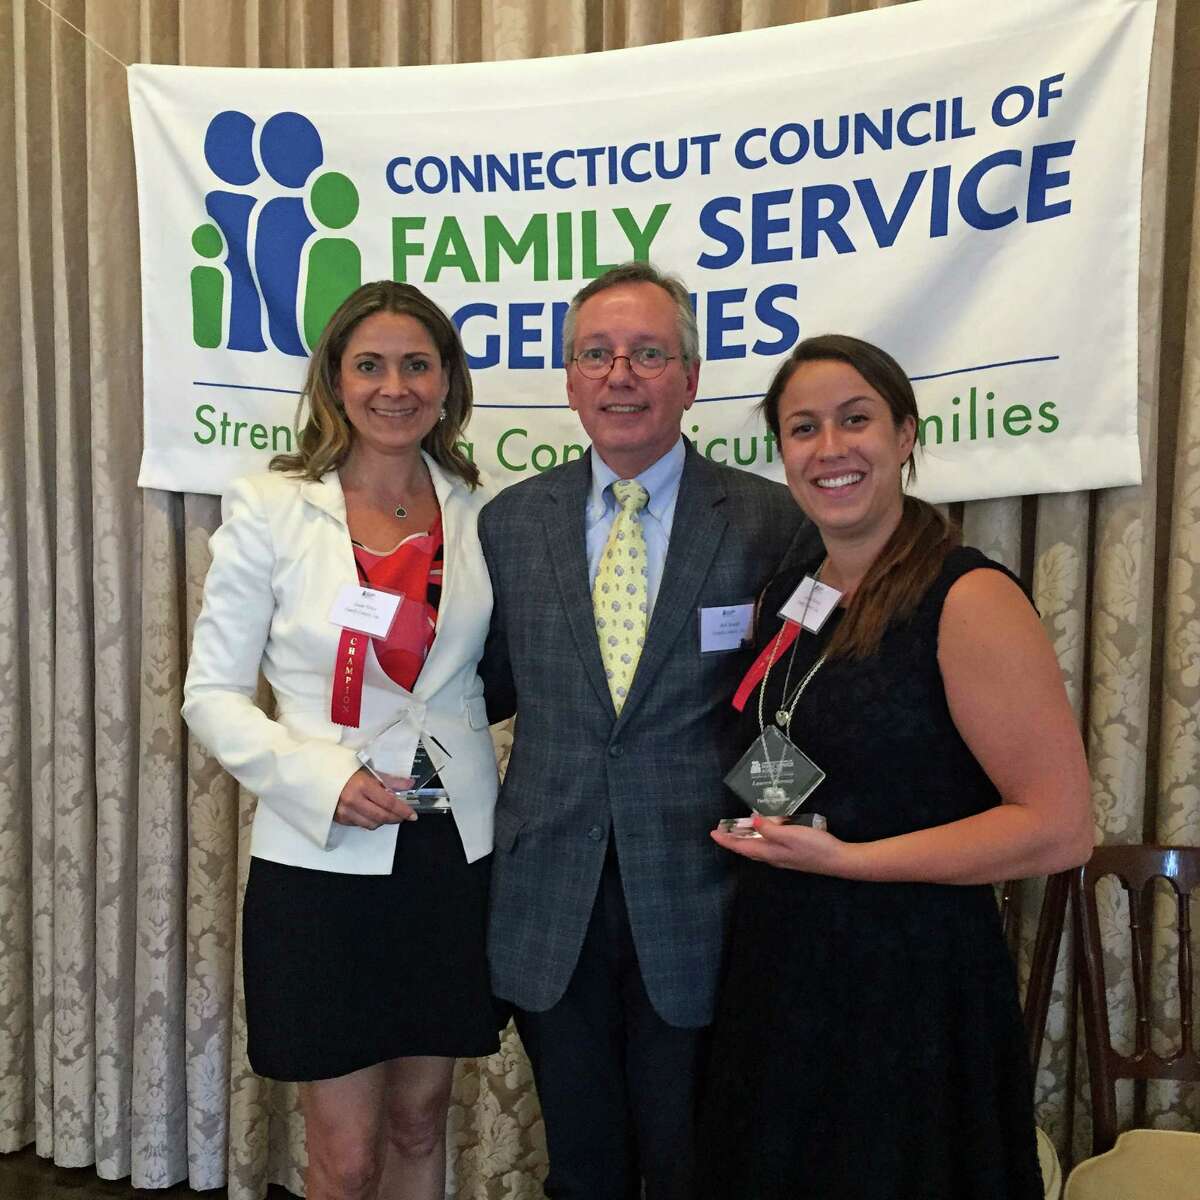 Family Centers?’ board member Susan Yonce (left) and staff member and Stamford resident Lauren Tierney (right) were recognized as ?“Family Champions?” by the Connecticut Council of Family Service Agencies for their outstanding commitment to improving the lives of families at a ceremony held in New Haven on June 2. Shown here with Family Centers?’ President Bob Arnold, they were among 28 human services professionals and volunteers whose unselfish actions have strengthened families in Connecticut. Since joining Family Centers?’ Board of Directors in 2010, Yonce, of Greenwich, has served as a co-chair of three Family Centers?’ annual benefits, which have collectively raised more than $2.1 million to the support the agency?’s health, human service and education programs. She has also co-chaired two successful luncheon fundraisers to benefit the bereavement and critical illness support offered by Family Centers?’ Center for HOPE and The Den for Grieving Kids programs. She also serves as Family Centers?’ current Board Secretary.